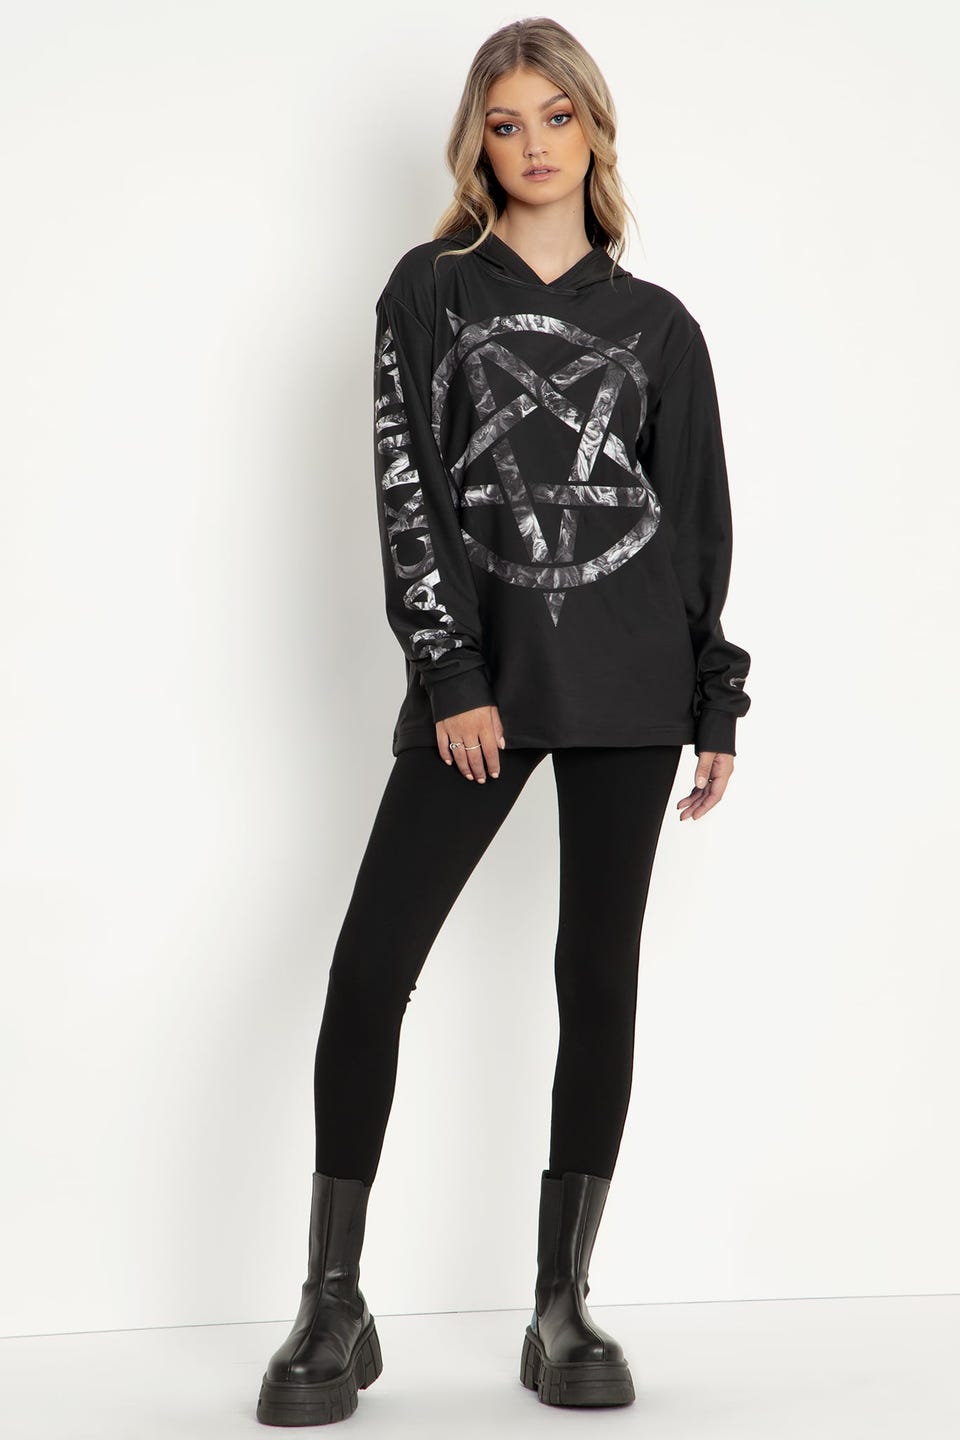 The Fall Of The Rebel Angels Pentagram Hoodie Sweater - Limited